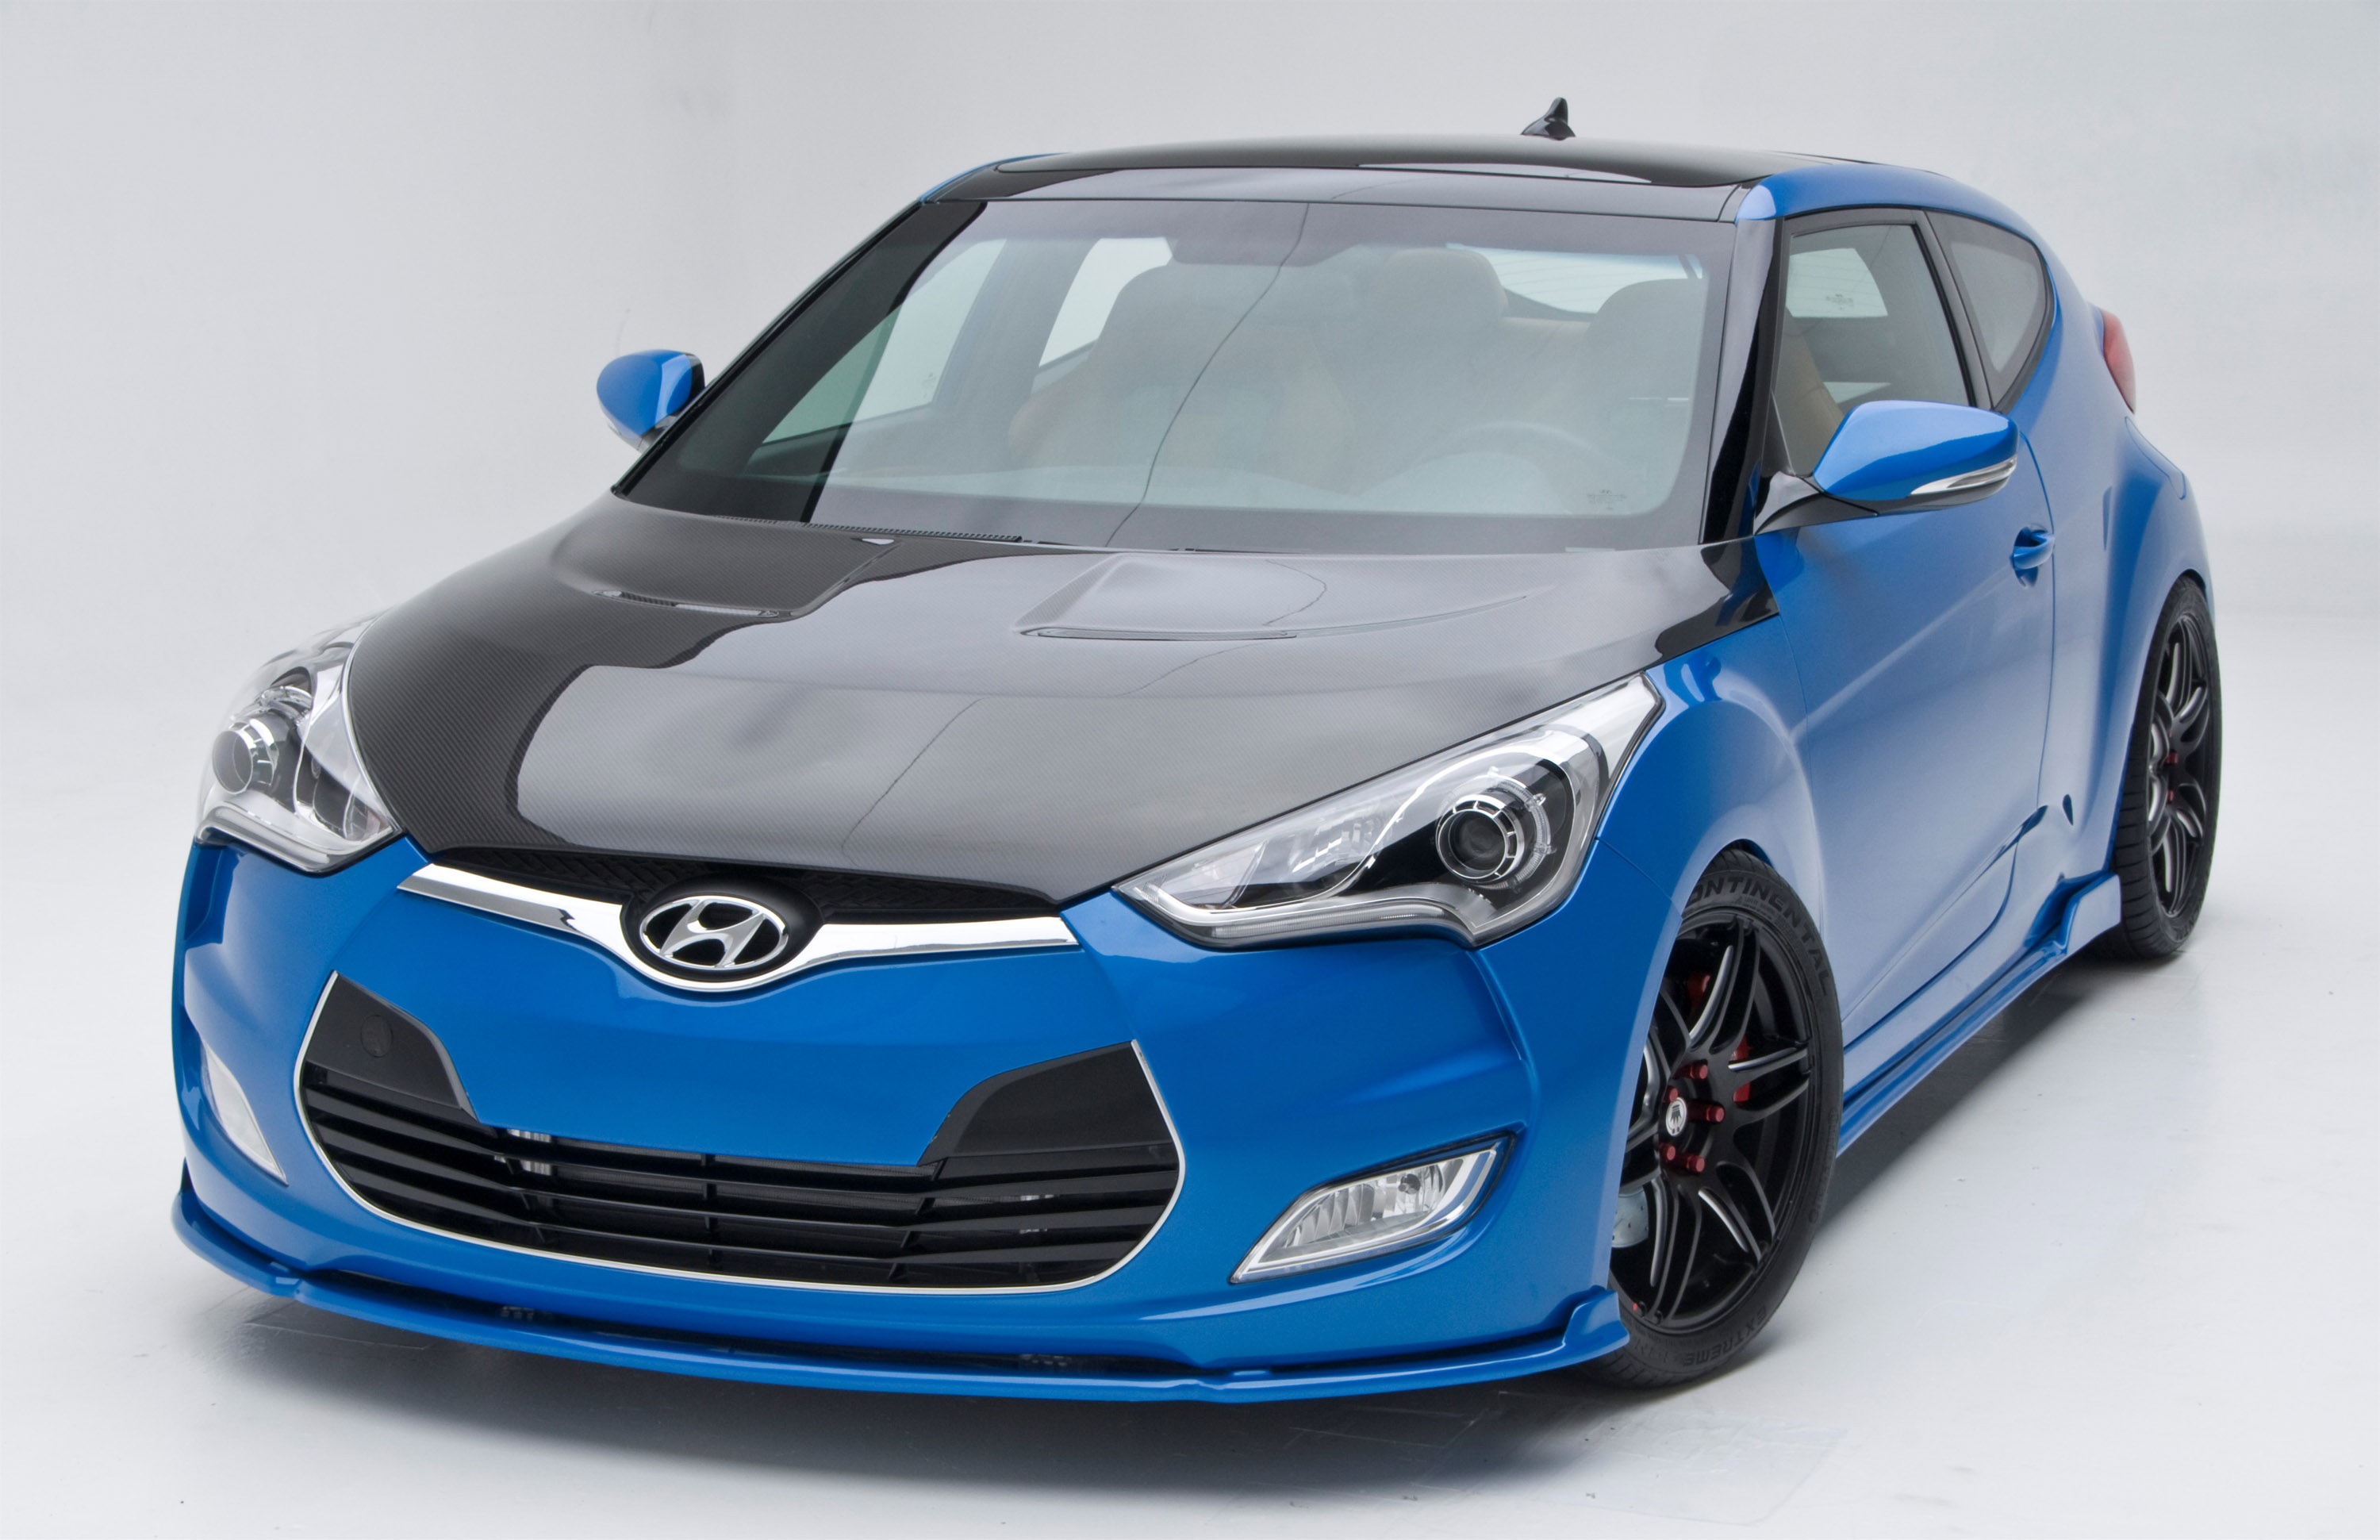 2012 Hyundai Veloster Mods / Veloster Is Hot Here Are 7 Of Them That ...